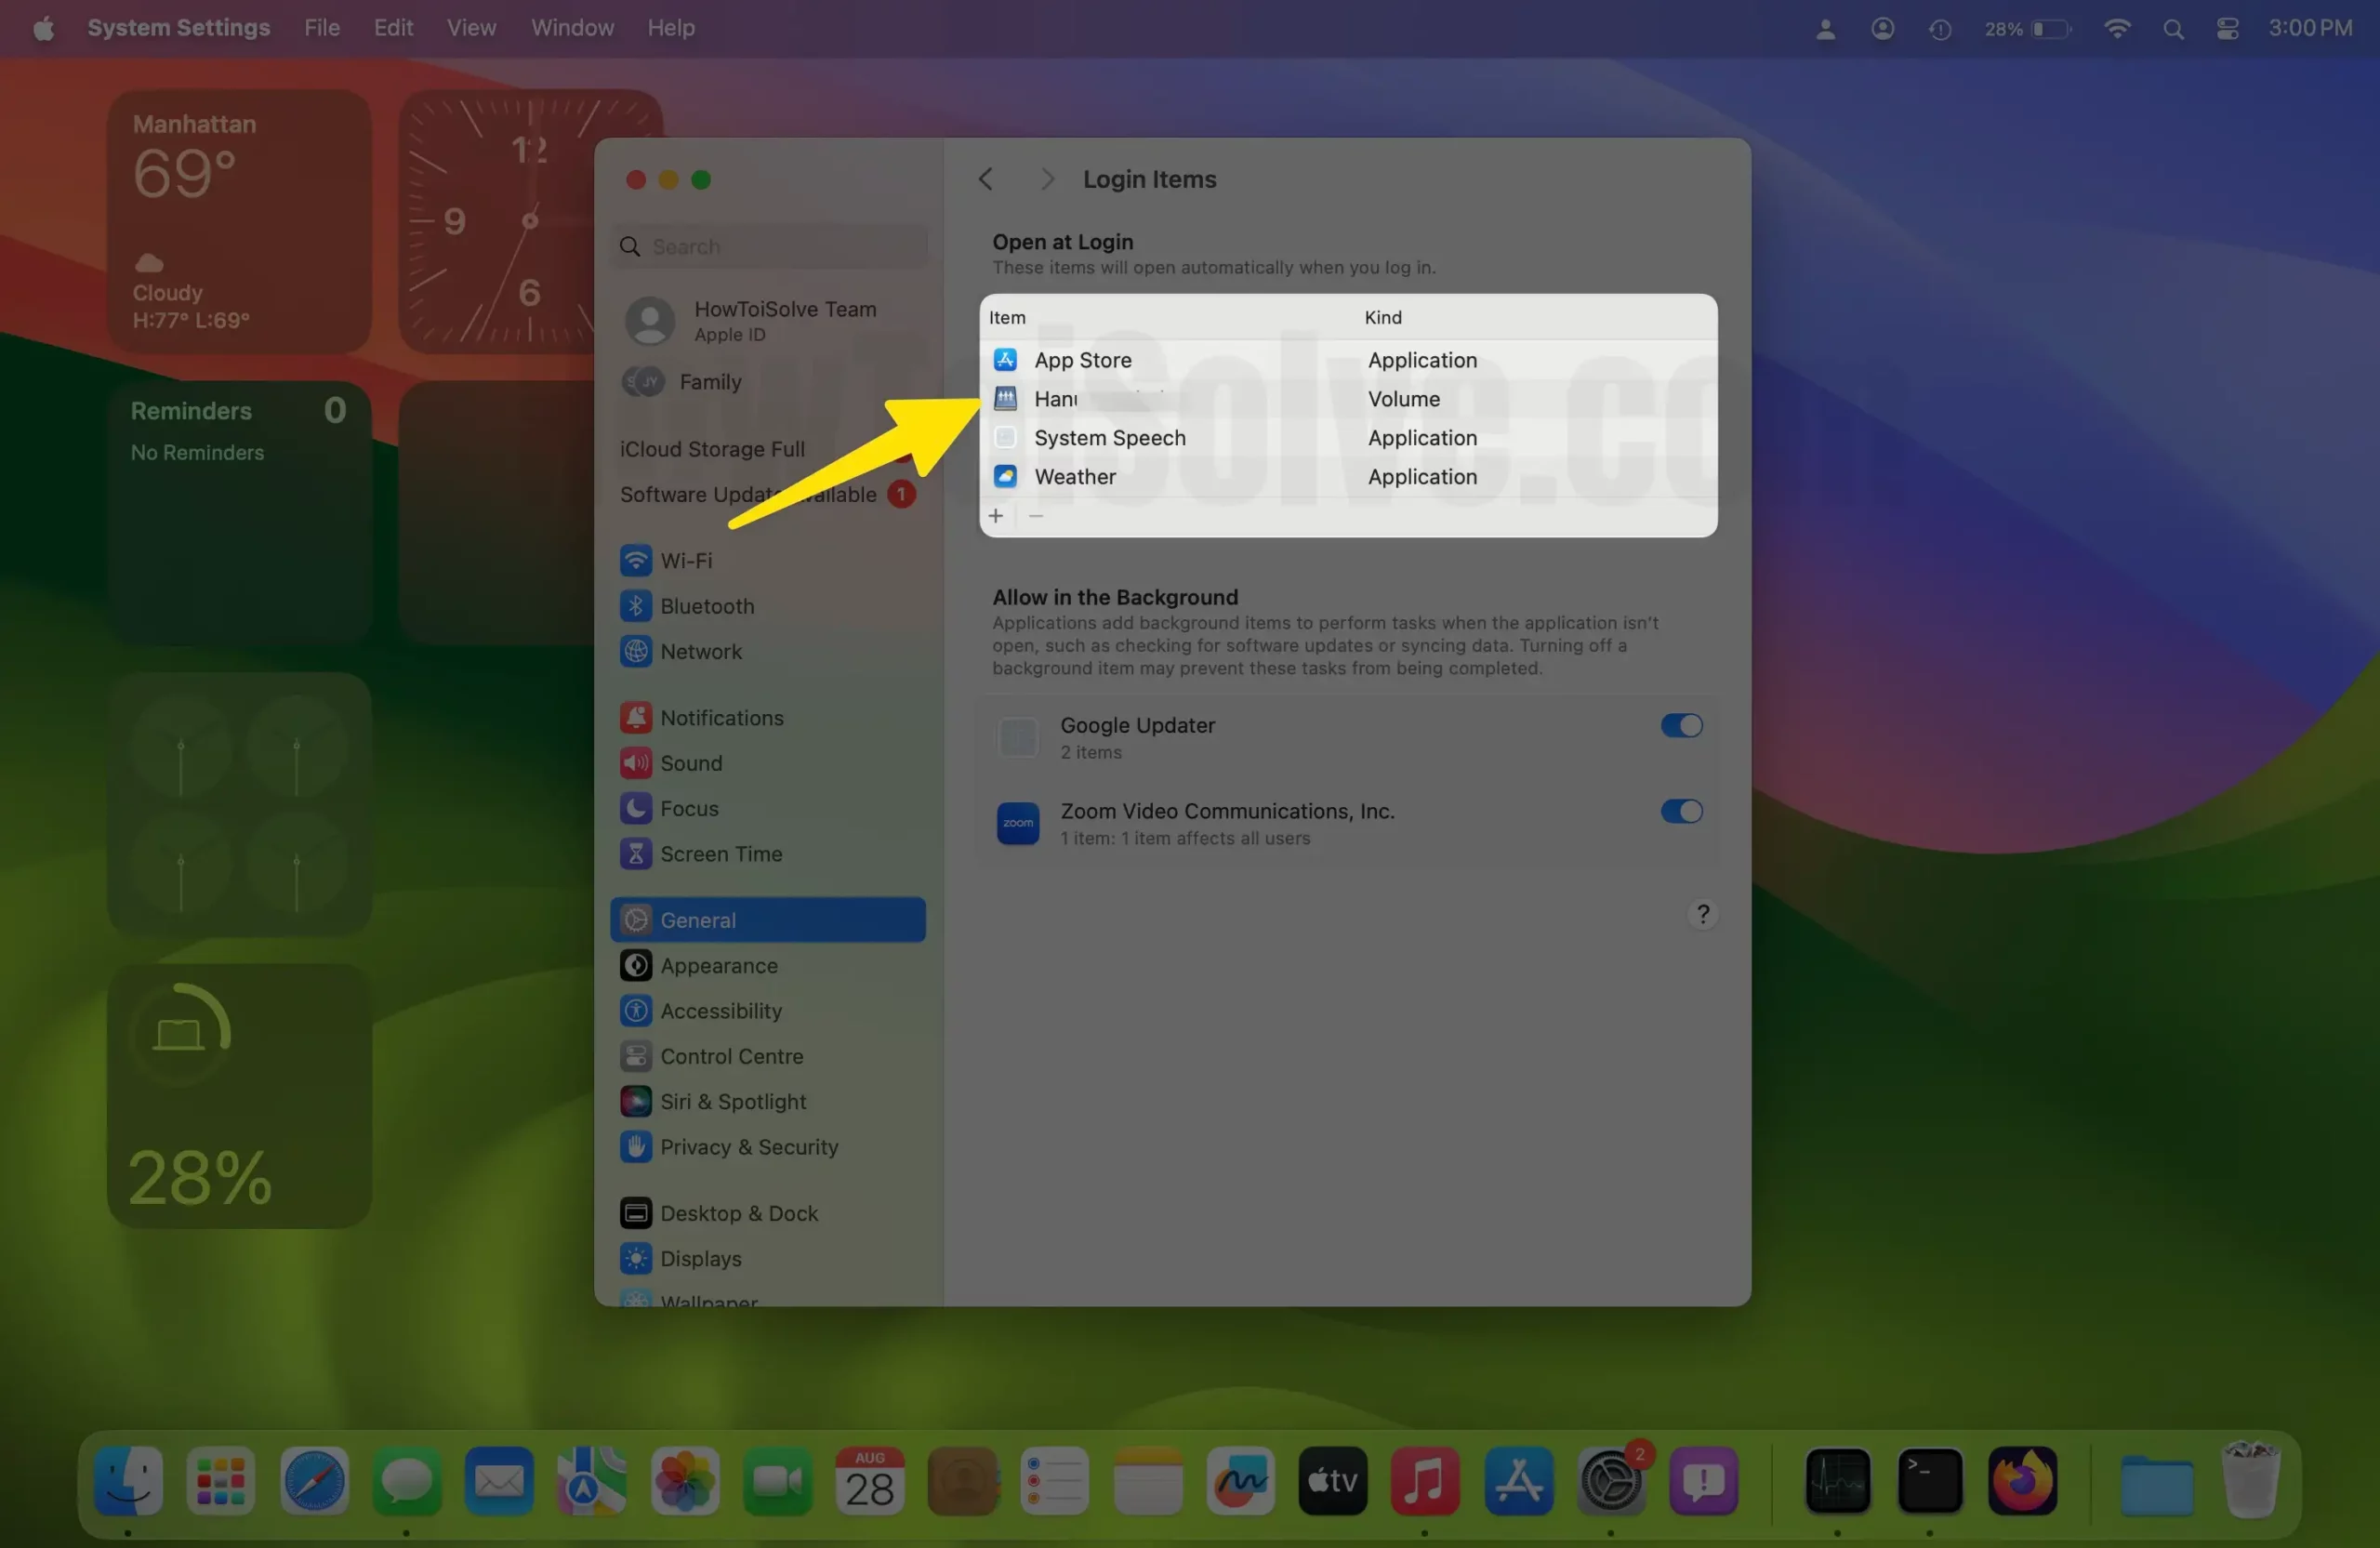 Automatically Network Drive connected on Mac